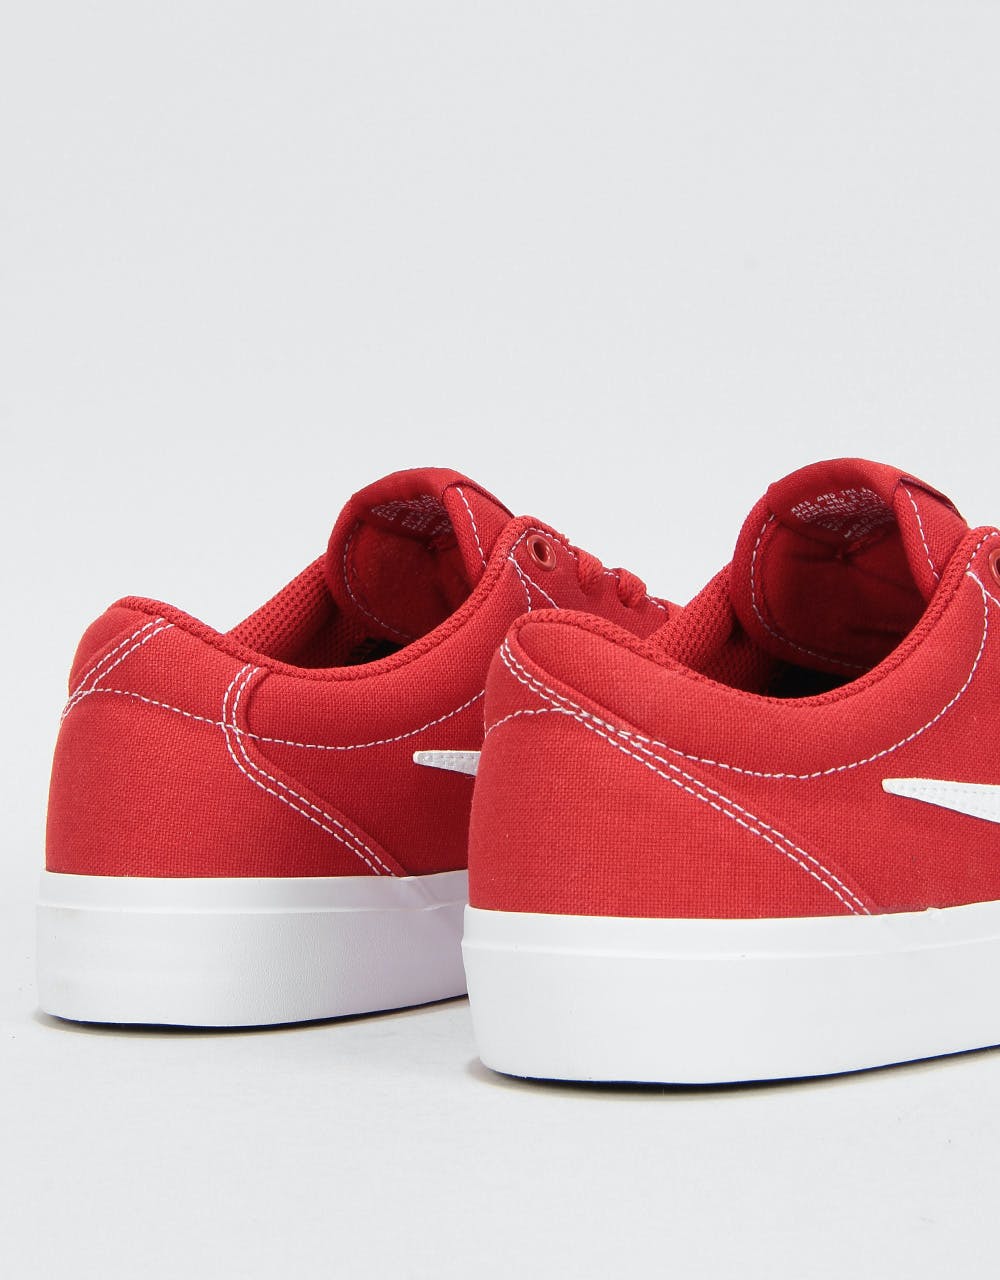 Nike SB Charge Solarsoft Canvas Skate Shoes - Mystic Red/White-Black